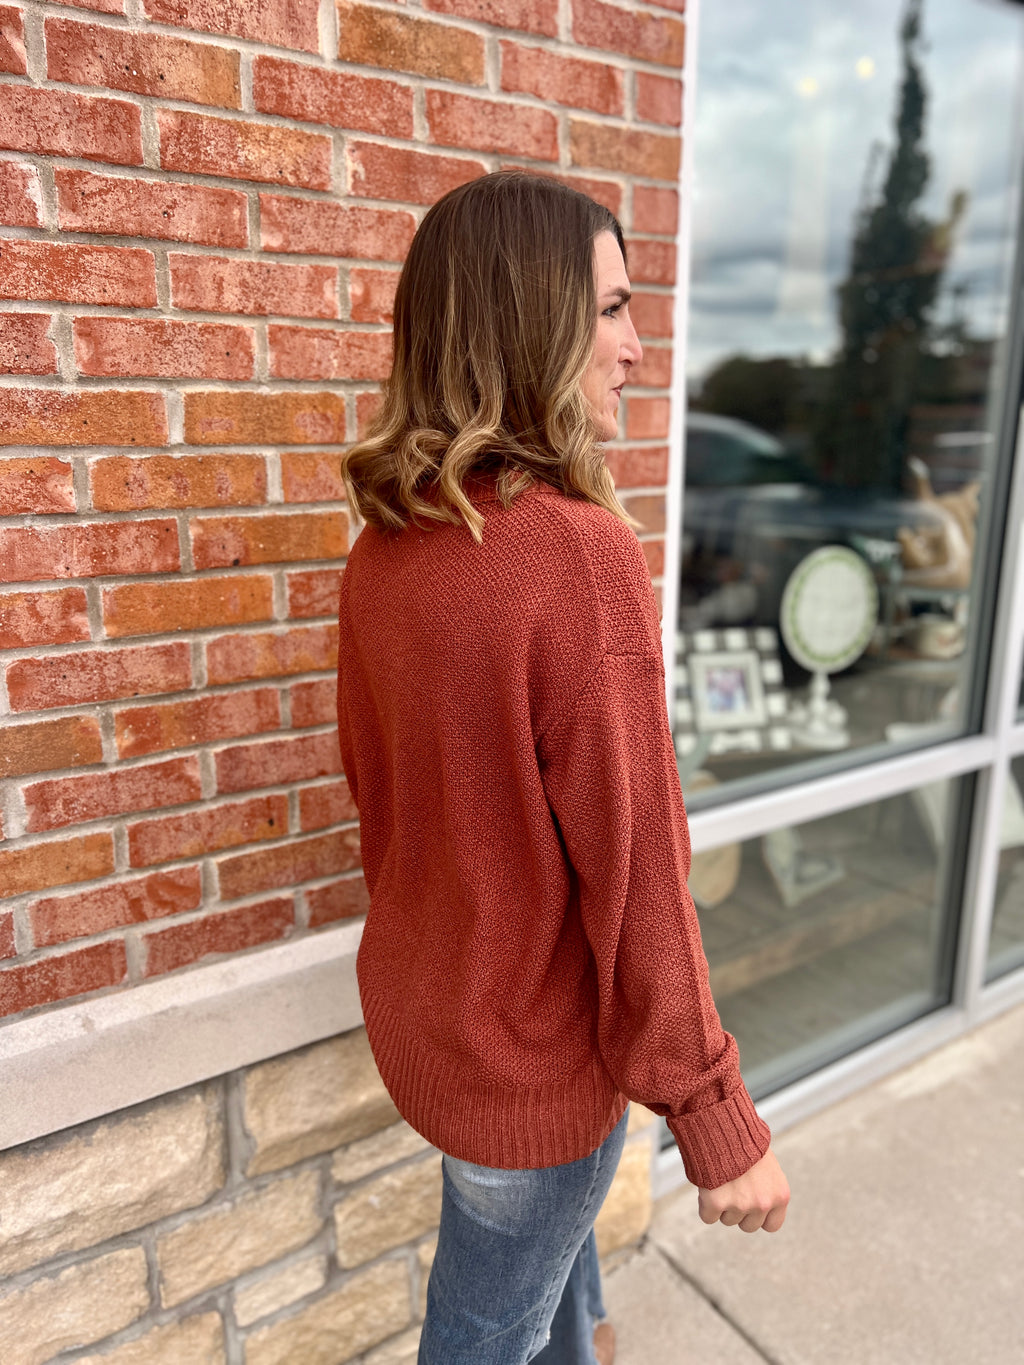 Misty Shores Sweater